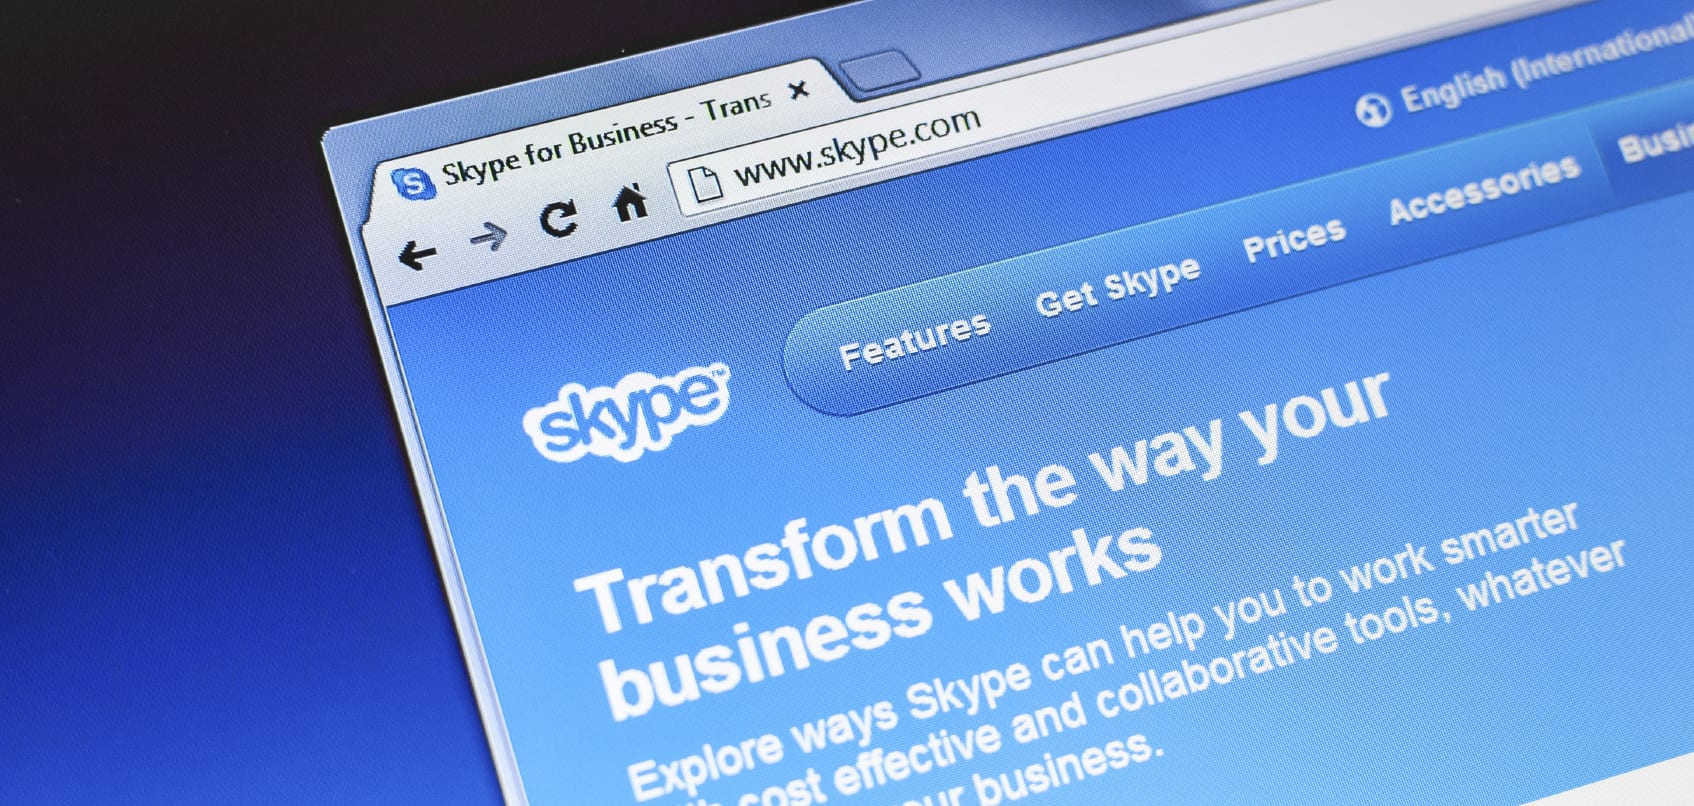 6 Tips for Conducting Skype Interviews